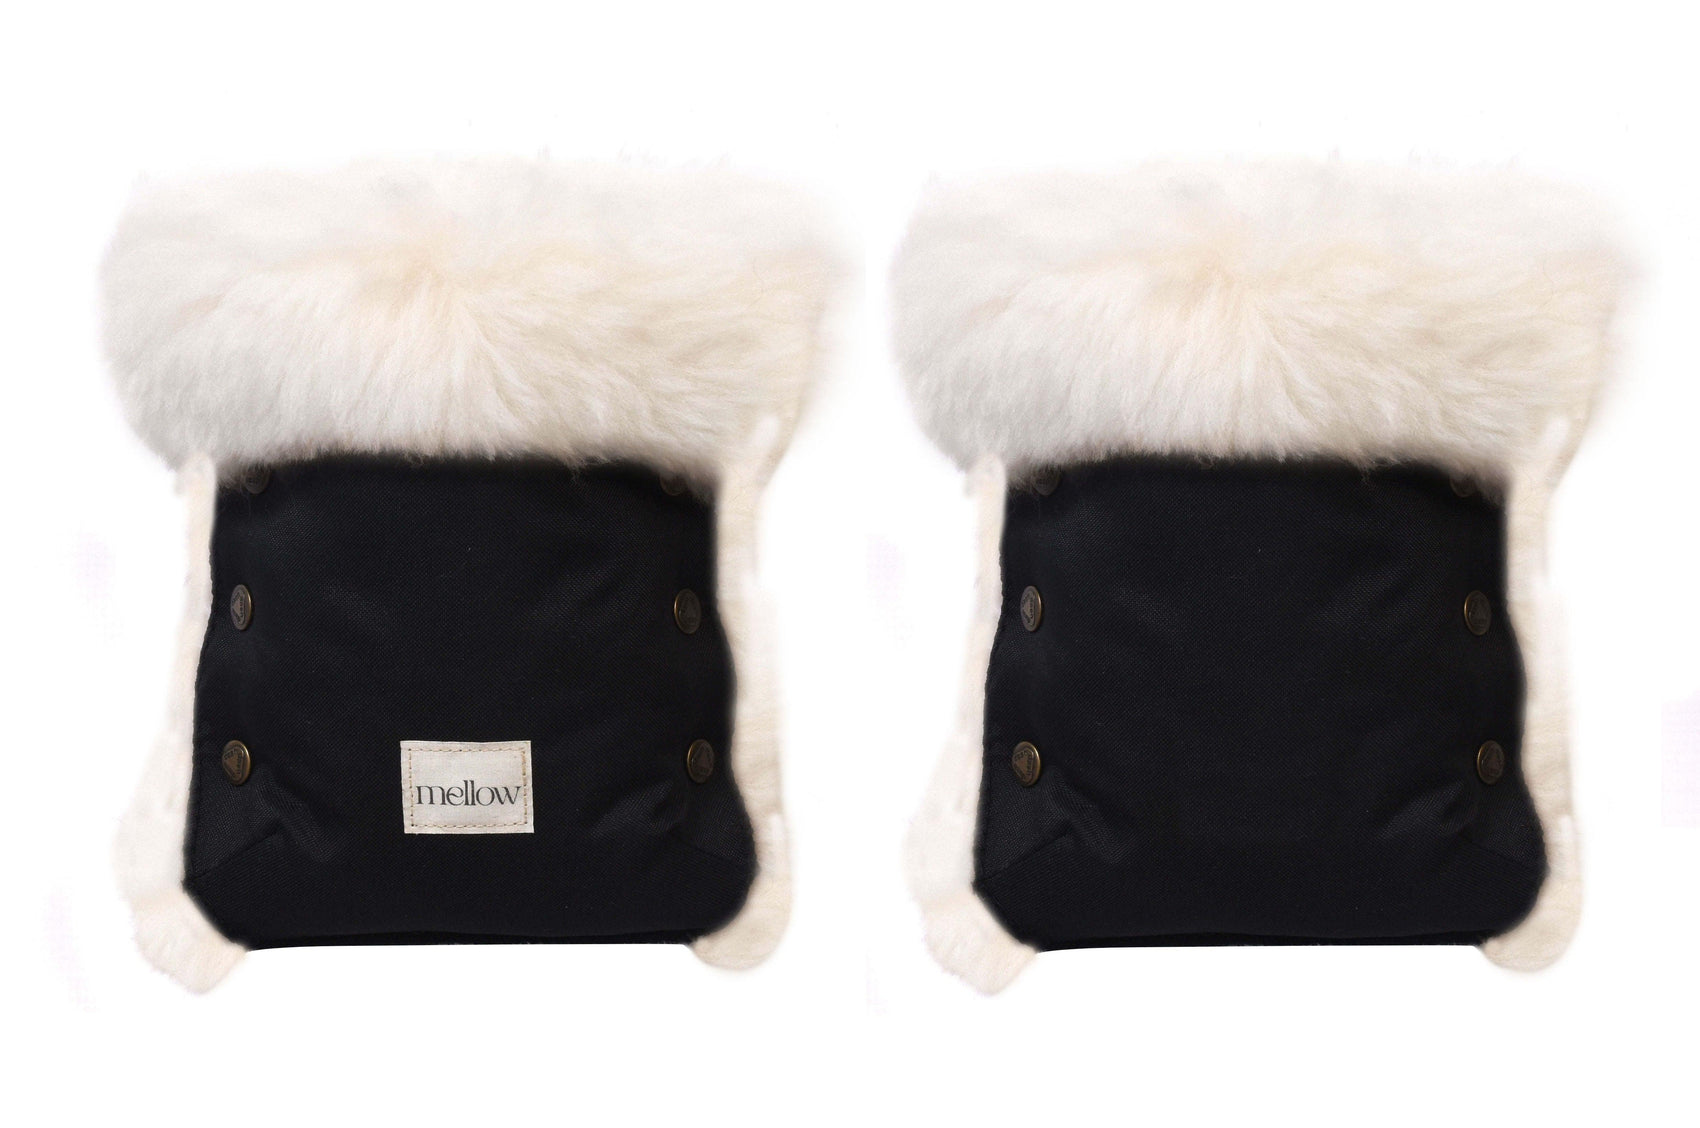 A pair of Waterproof Natural Sheepskin Stroller Hand Muffs in Black&White from MellowConceptStore.